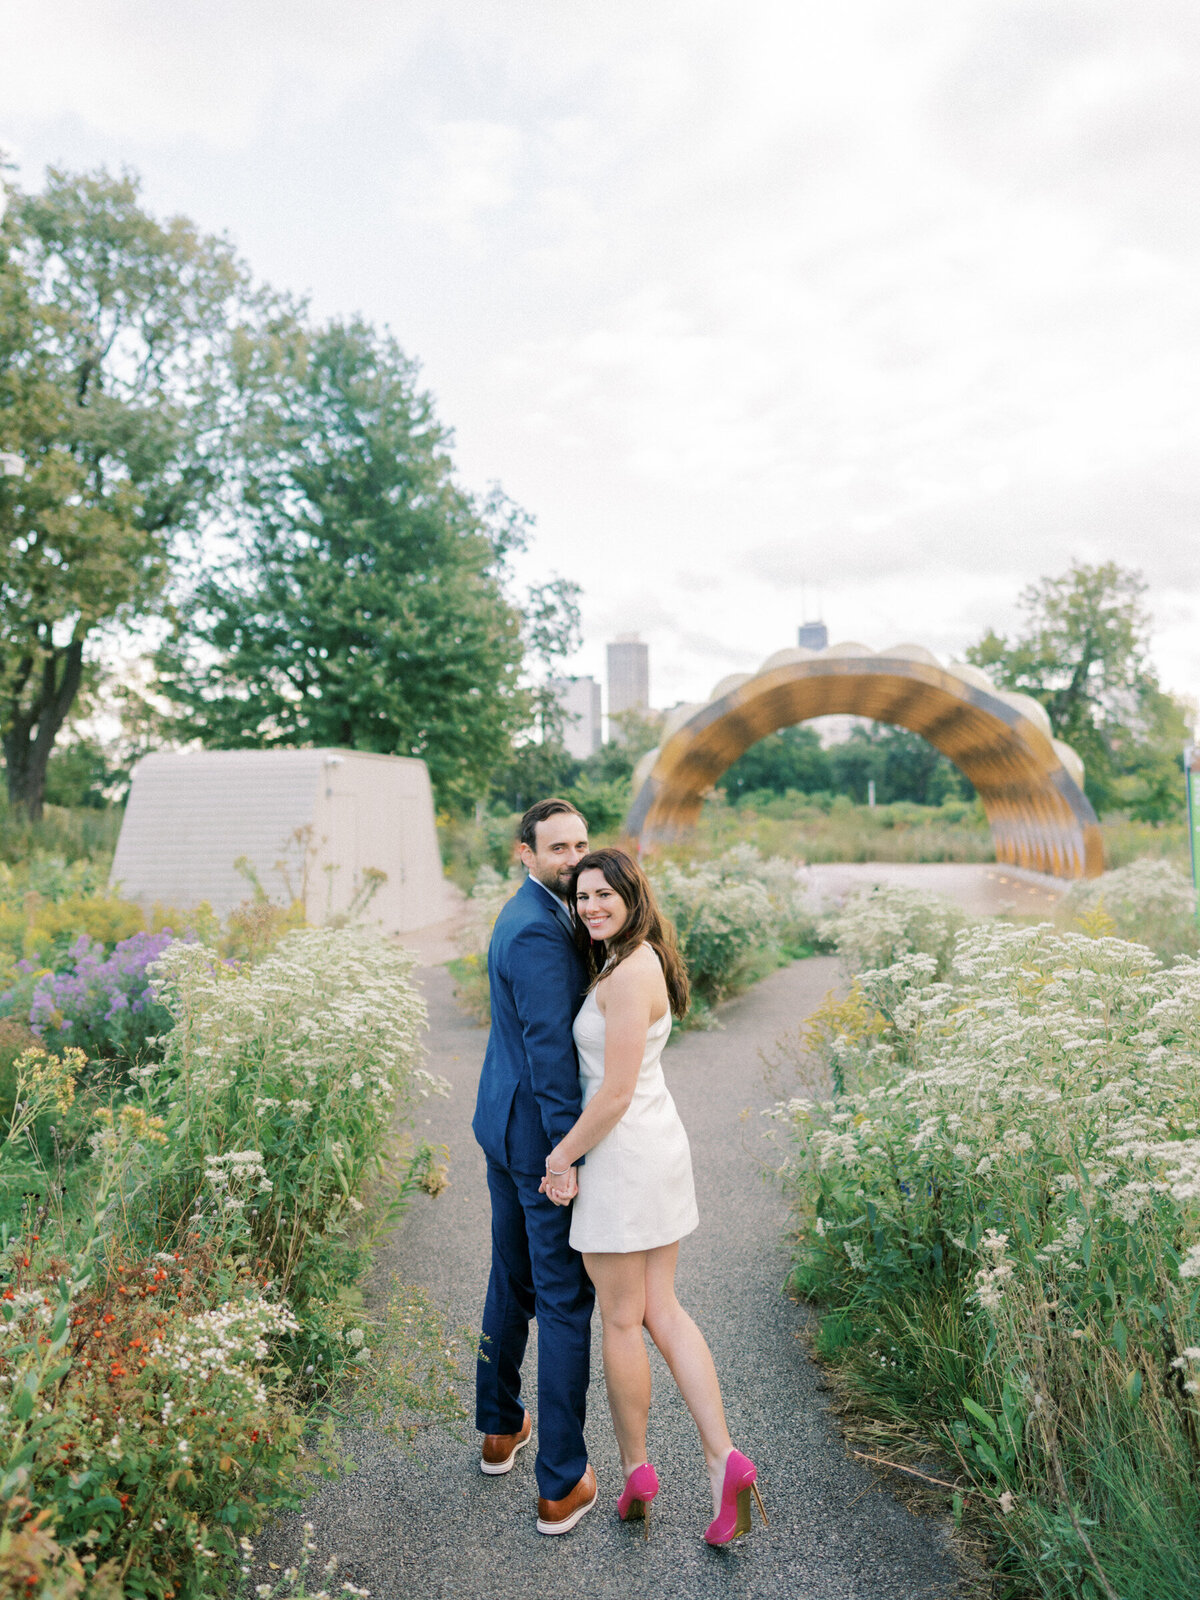 Lincoln Park Chicago Fall Engagement Session Highlights | Amarachi Ikeji Photography 08